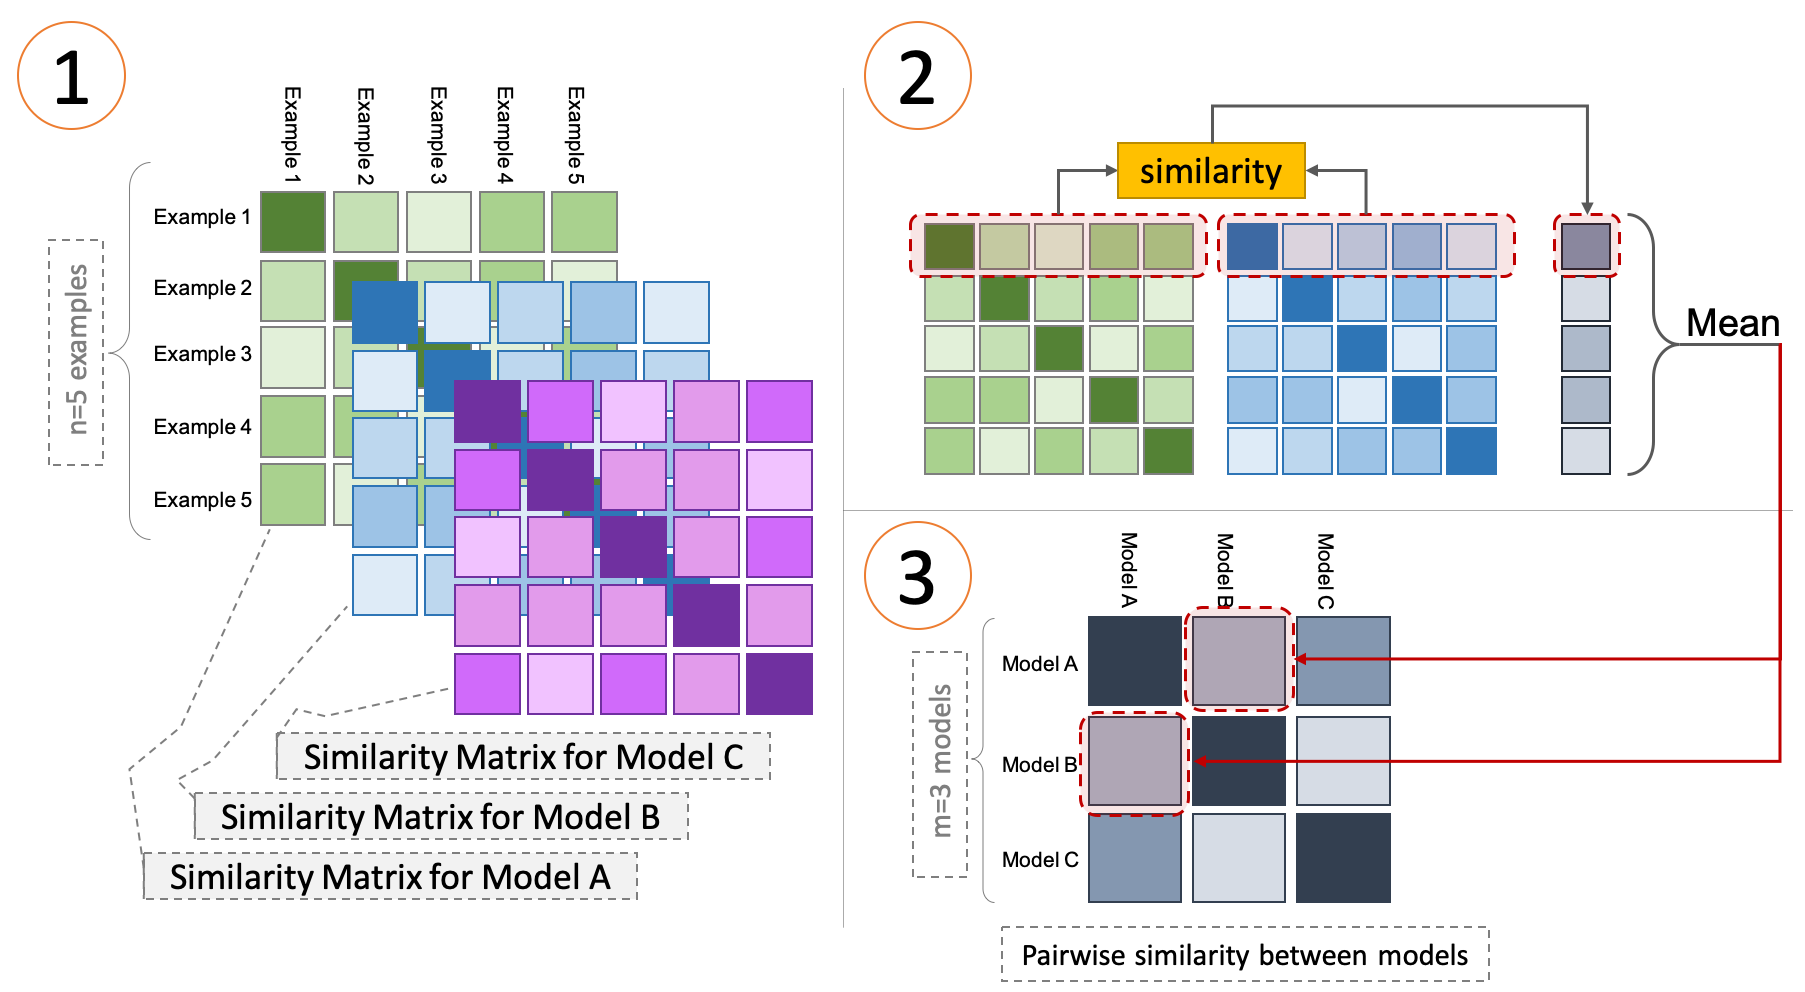 The Representational Similarity Analysis (RSA) algorithm applied to the representations of three models. Image taken from Abnar (2020).